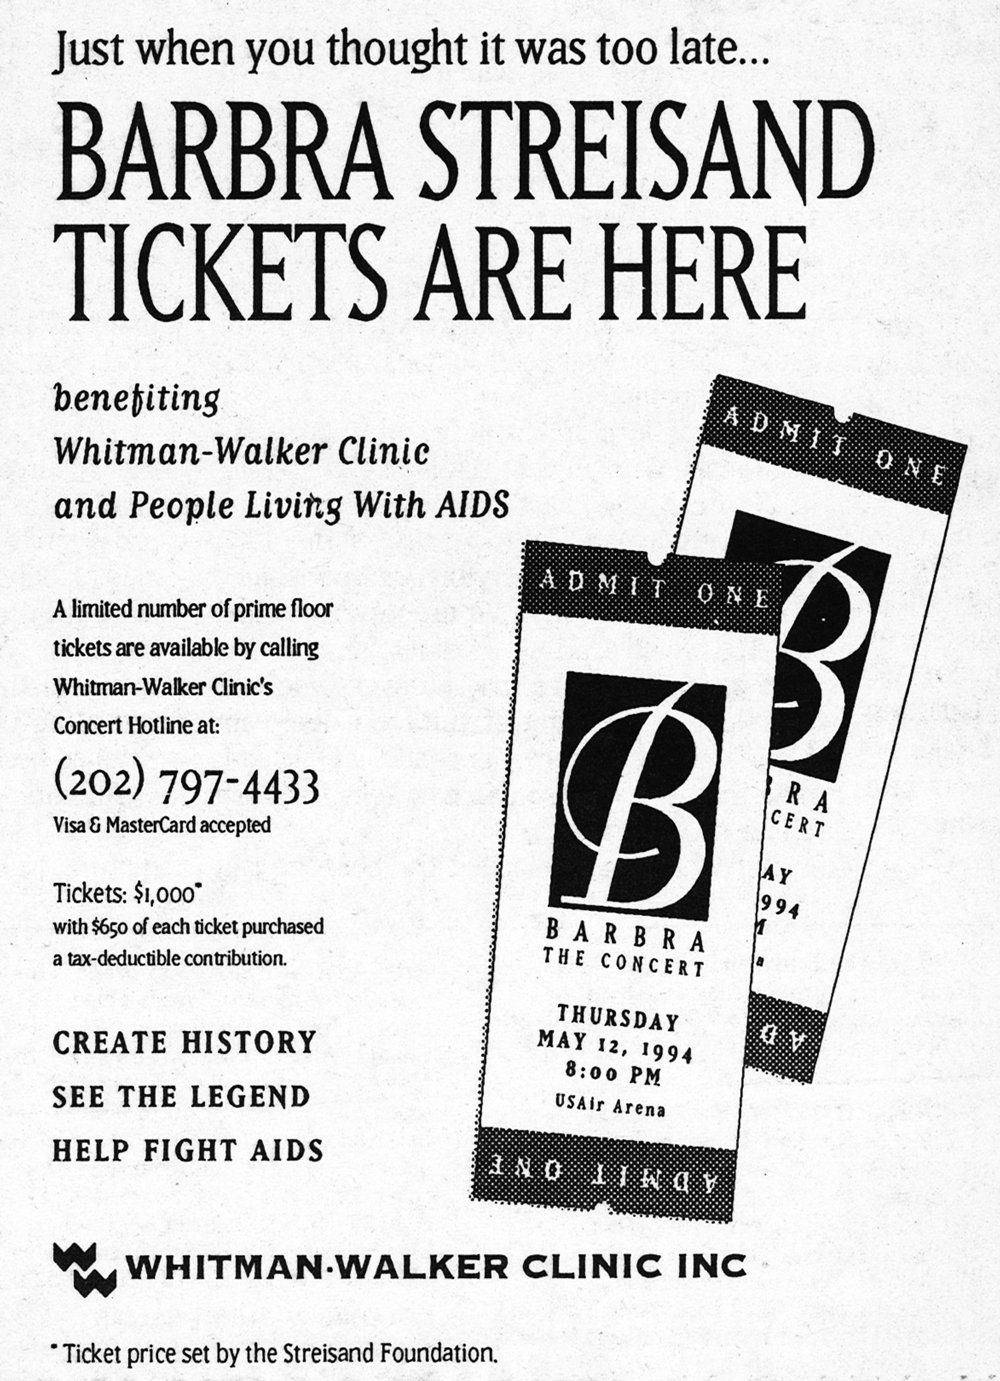 A Streisand charity tickets newspaper ad for DC's Whitman Walker Clinic